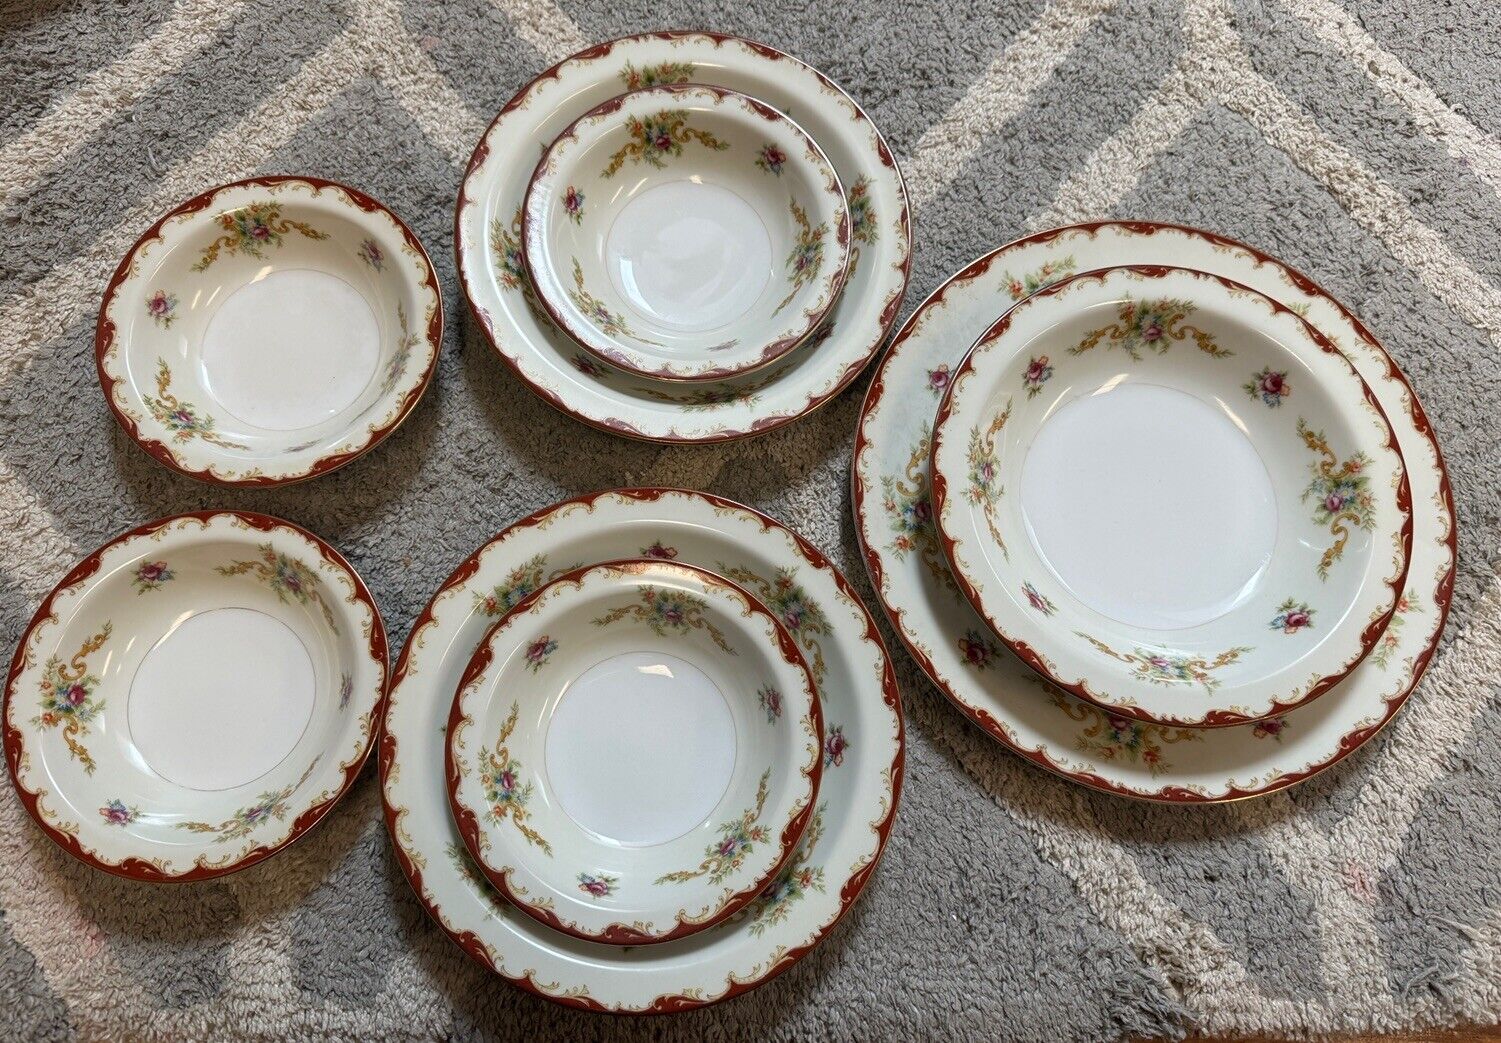 Vintage Harmony House Wembley Fine China 8 Piece Set Circa 1950-1959 Red Floral